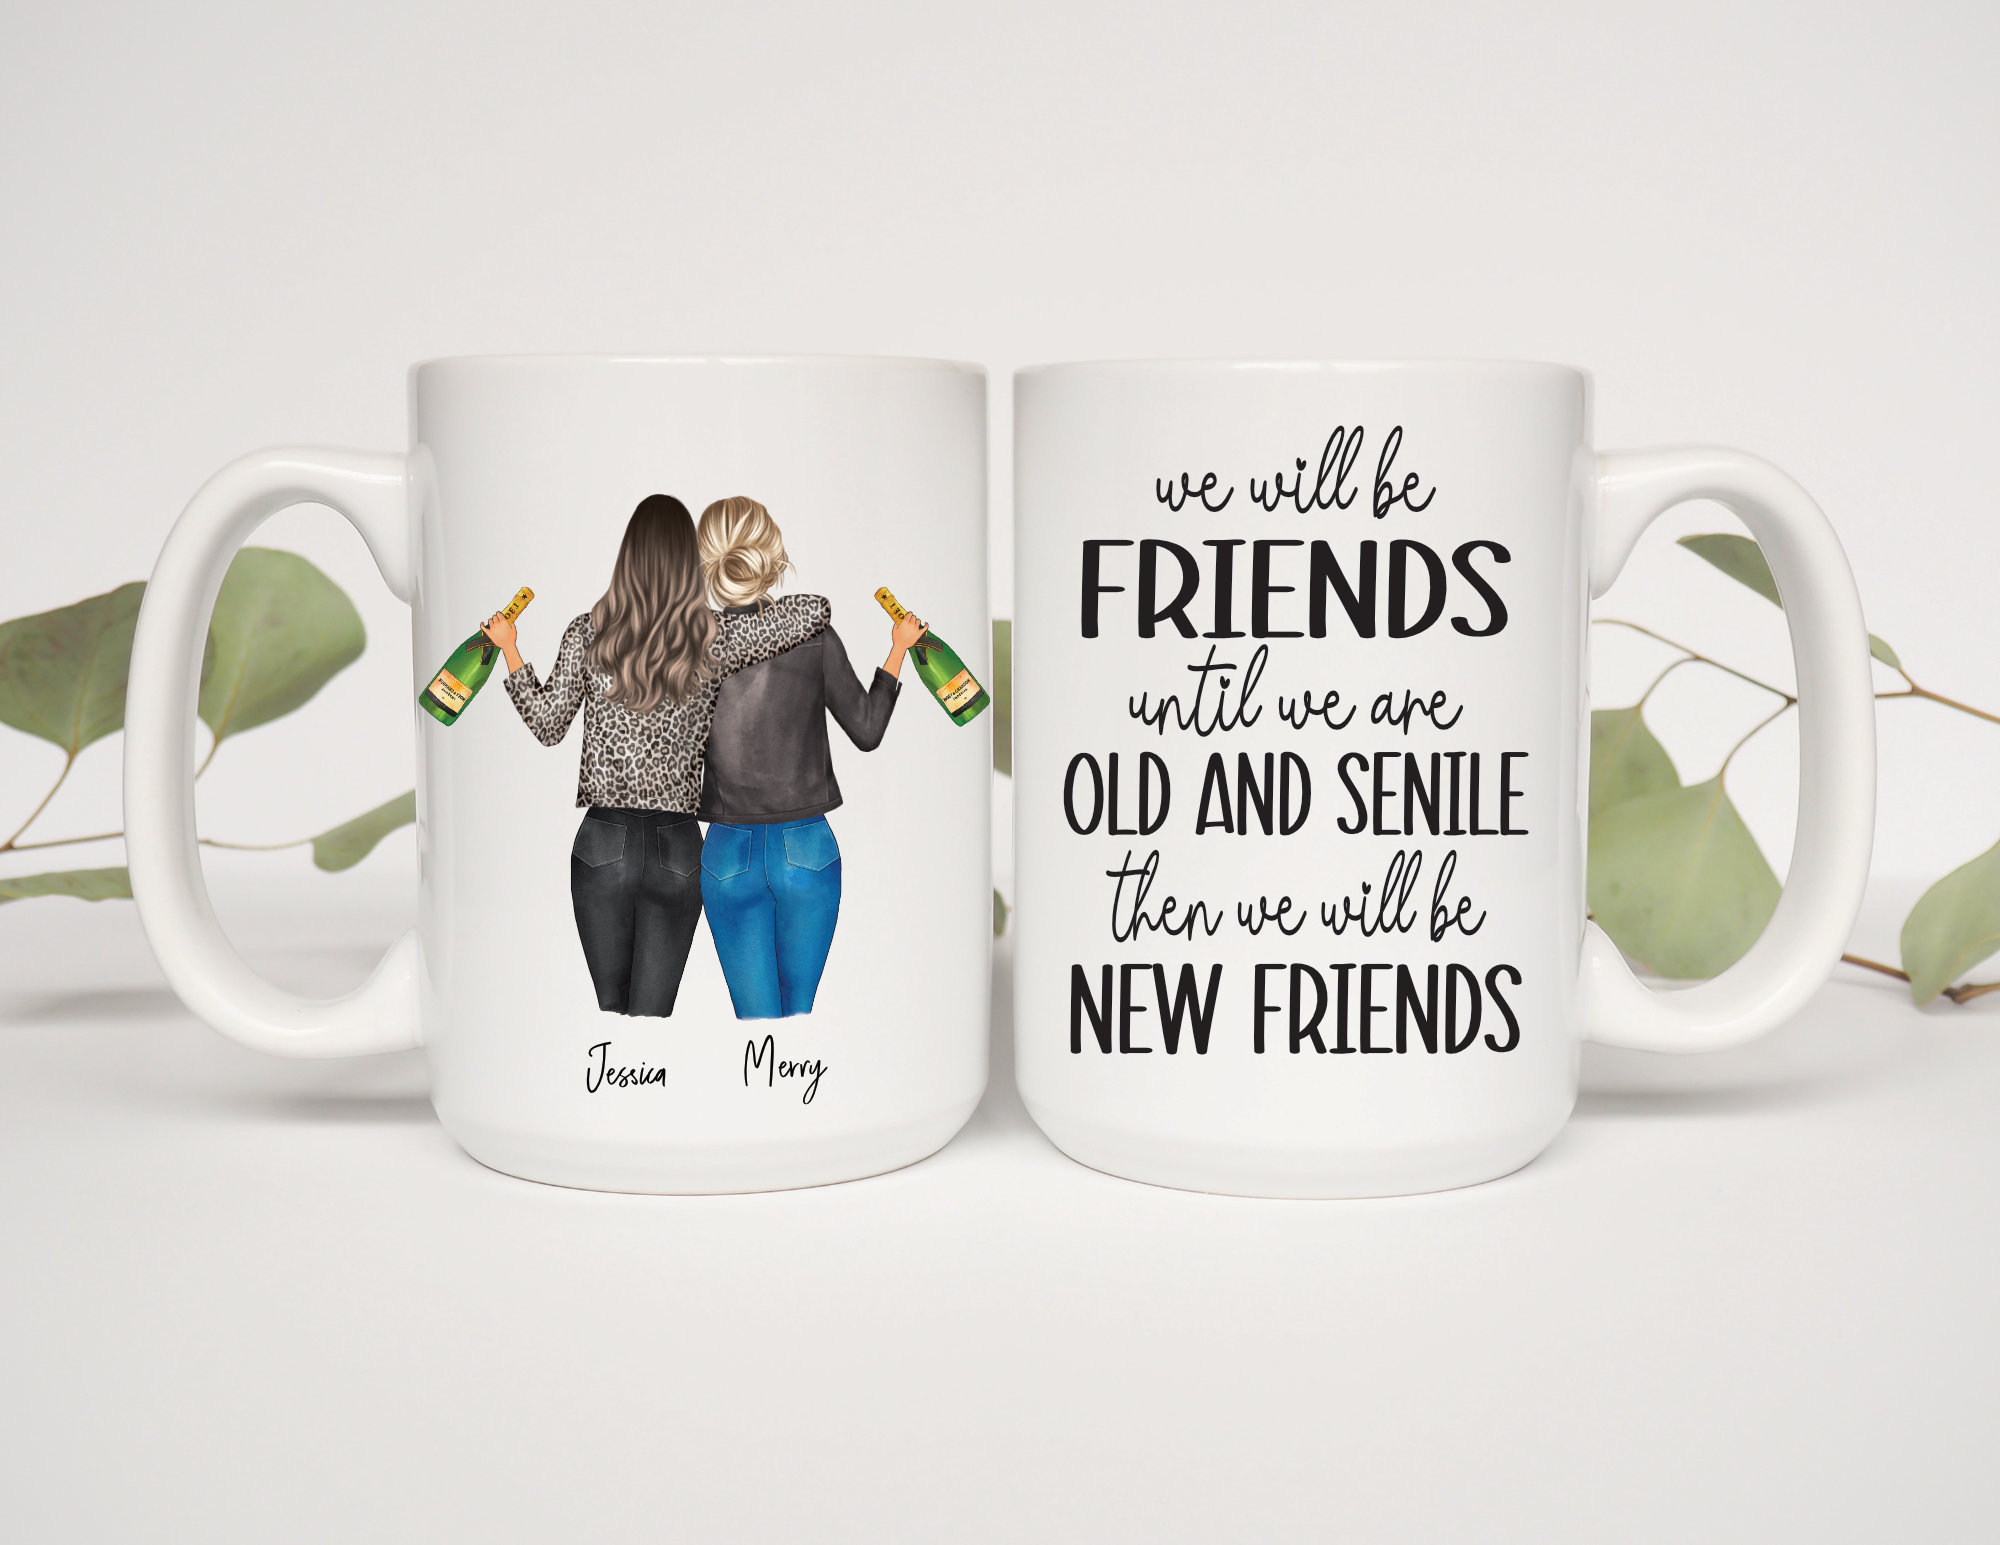 Personalized Mug - Up to 5 Girls - Besties Mug - Si Les Bons Amis Sont  Difficiles À Trouver